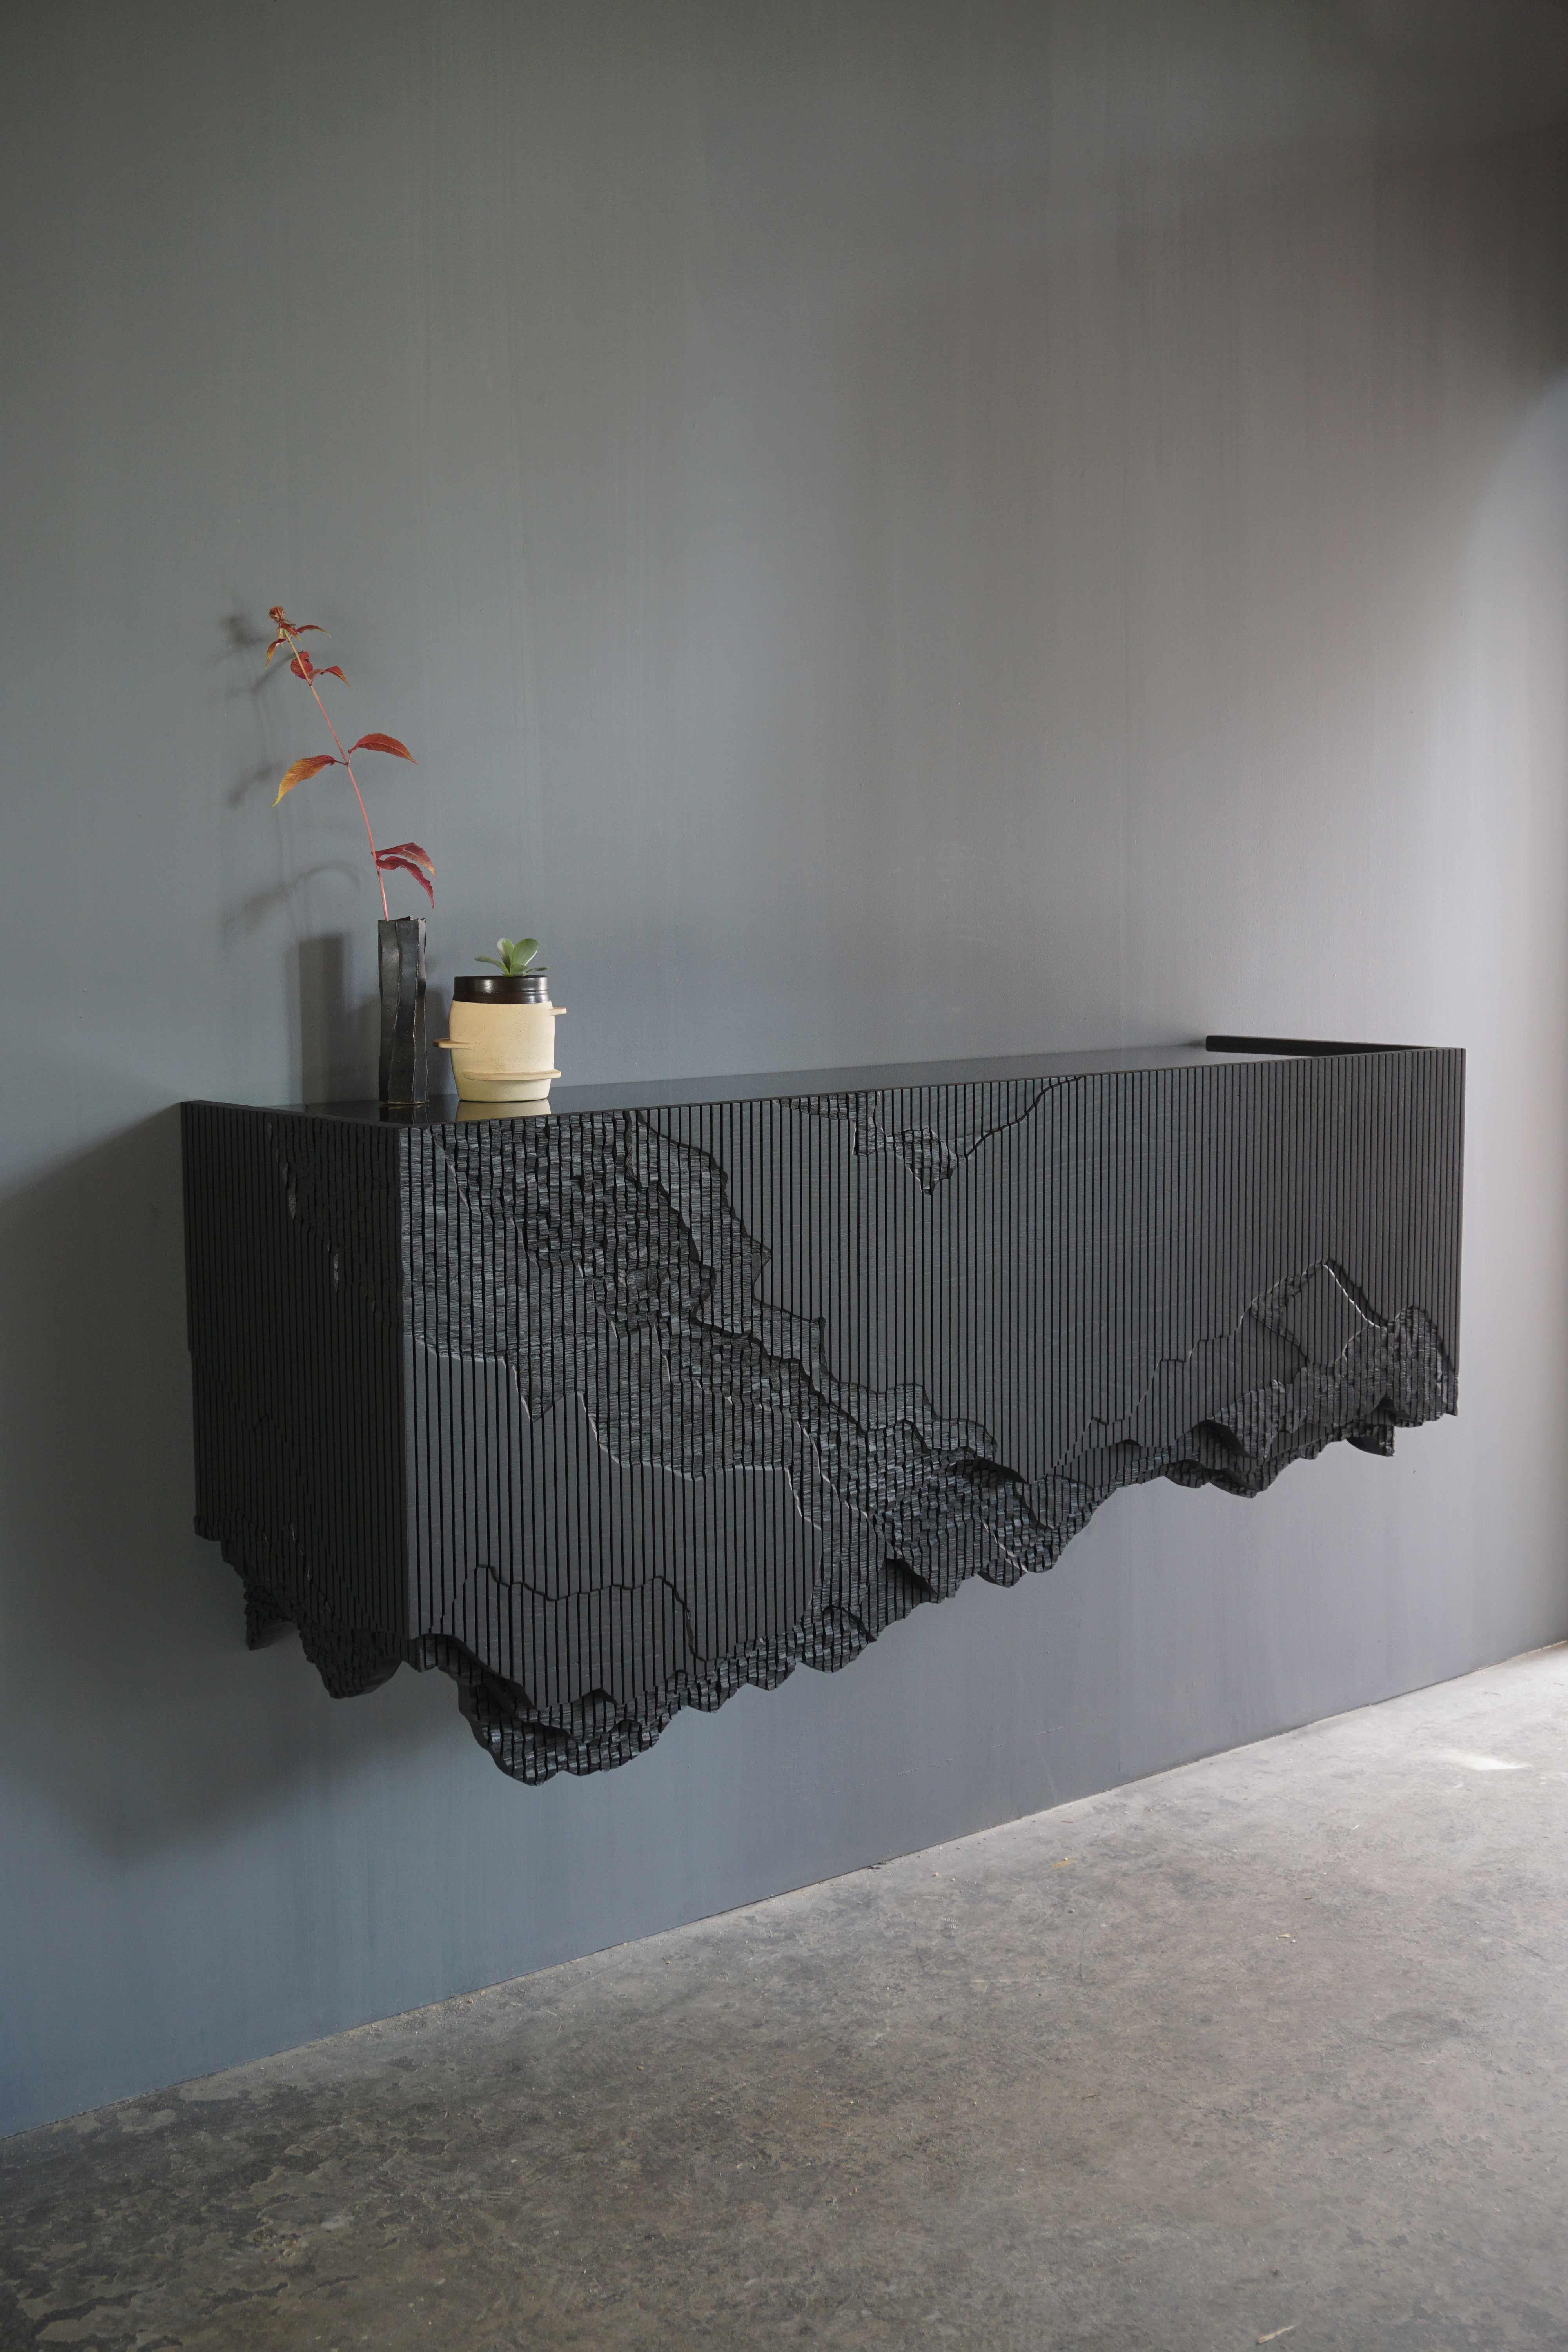 Ledge is a floating console, mounted to the wall, in solid ash with a black glass top. It stems from material exploration inspired by the cliffs around Johns’ studio, making solid ash reference crumbling stone through a unique technique. The wood